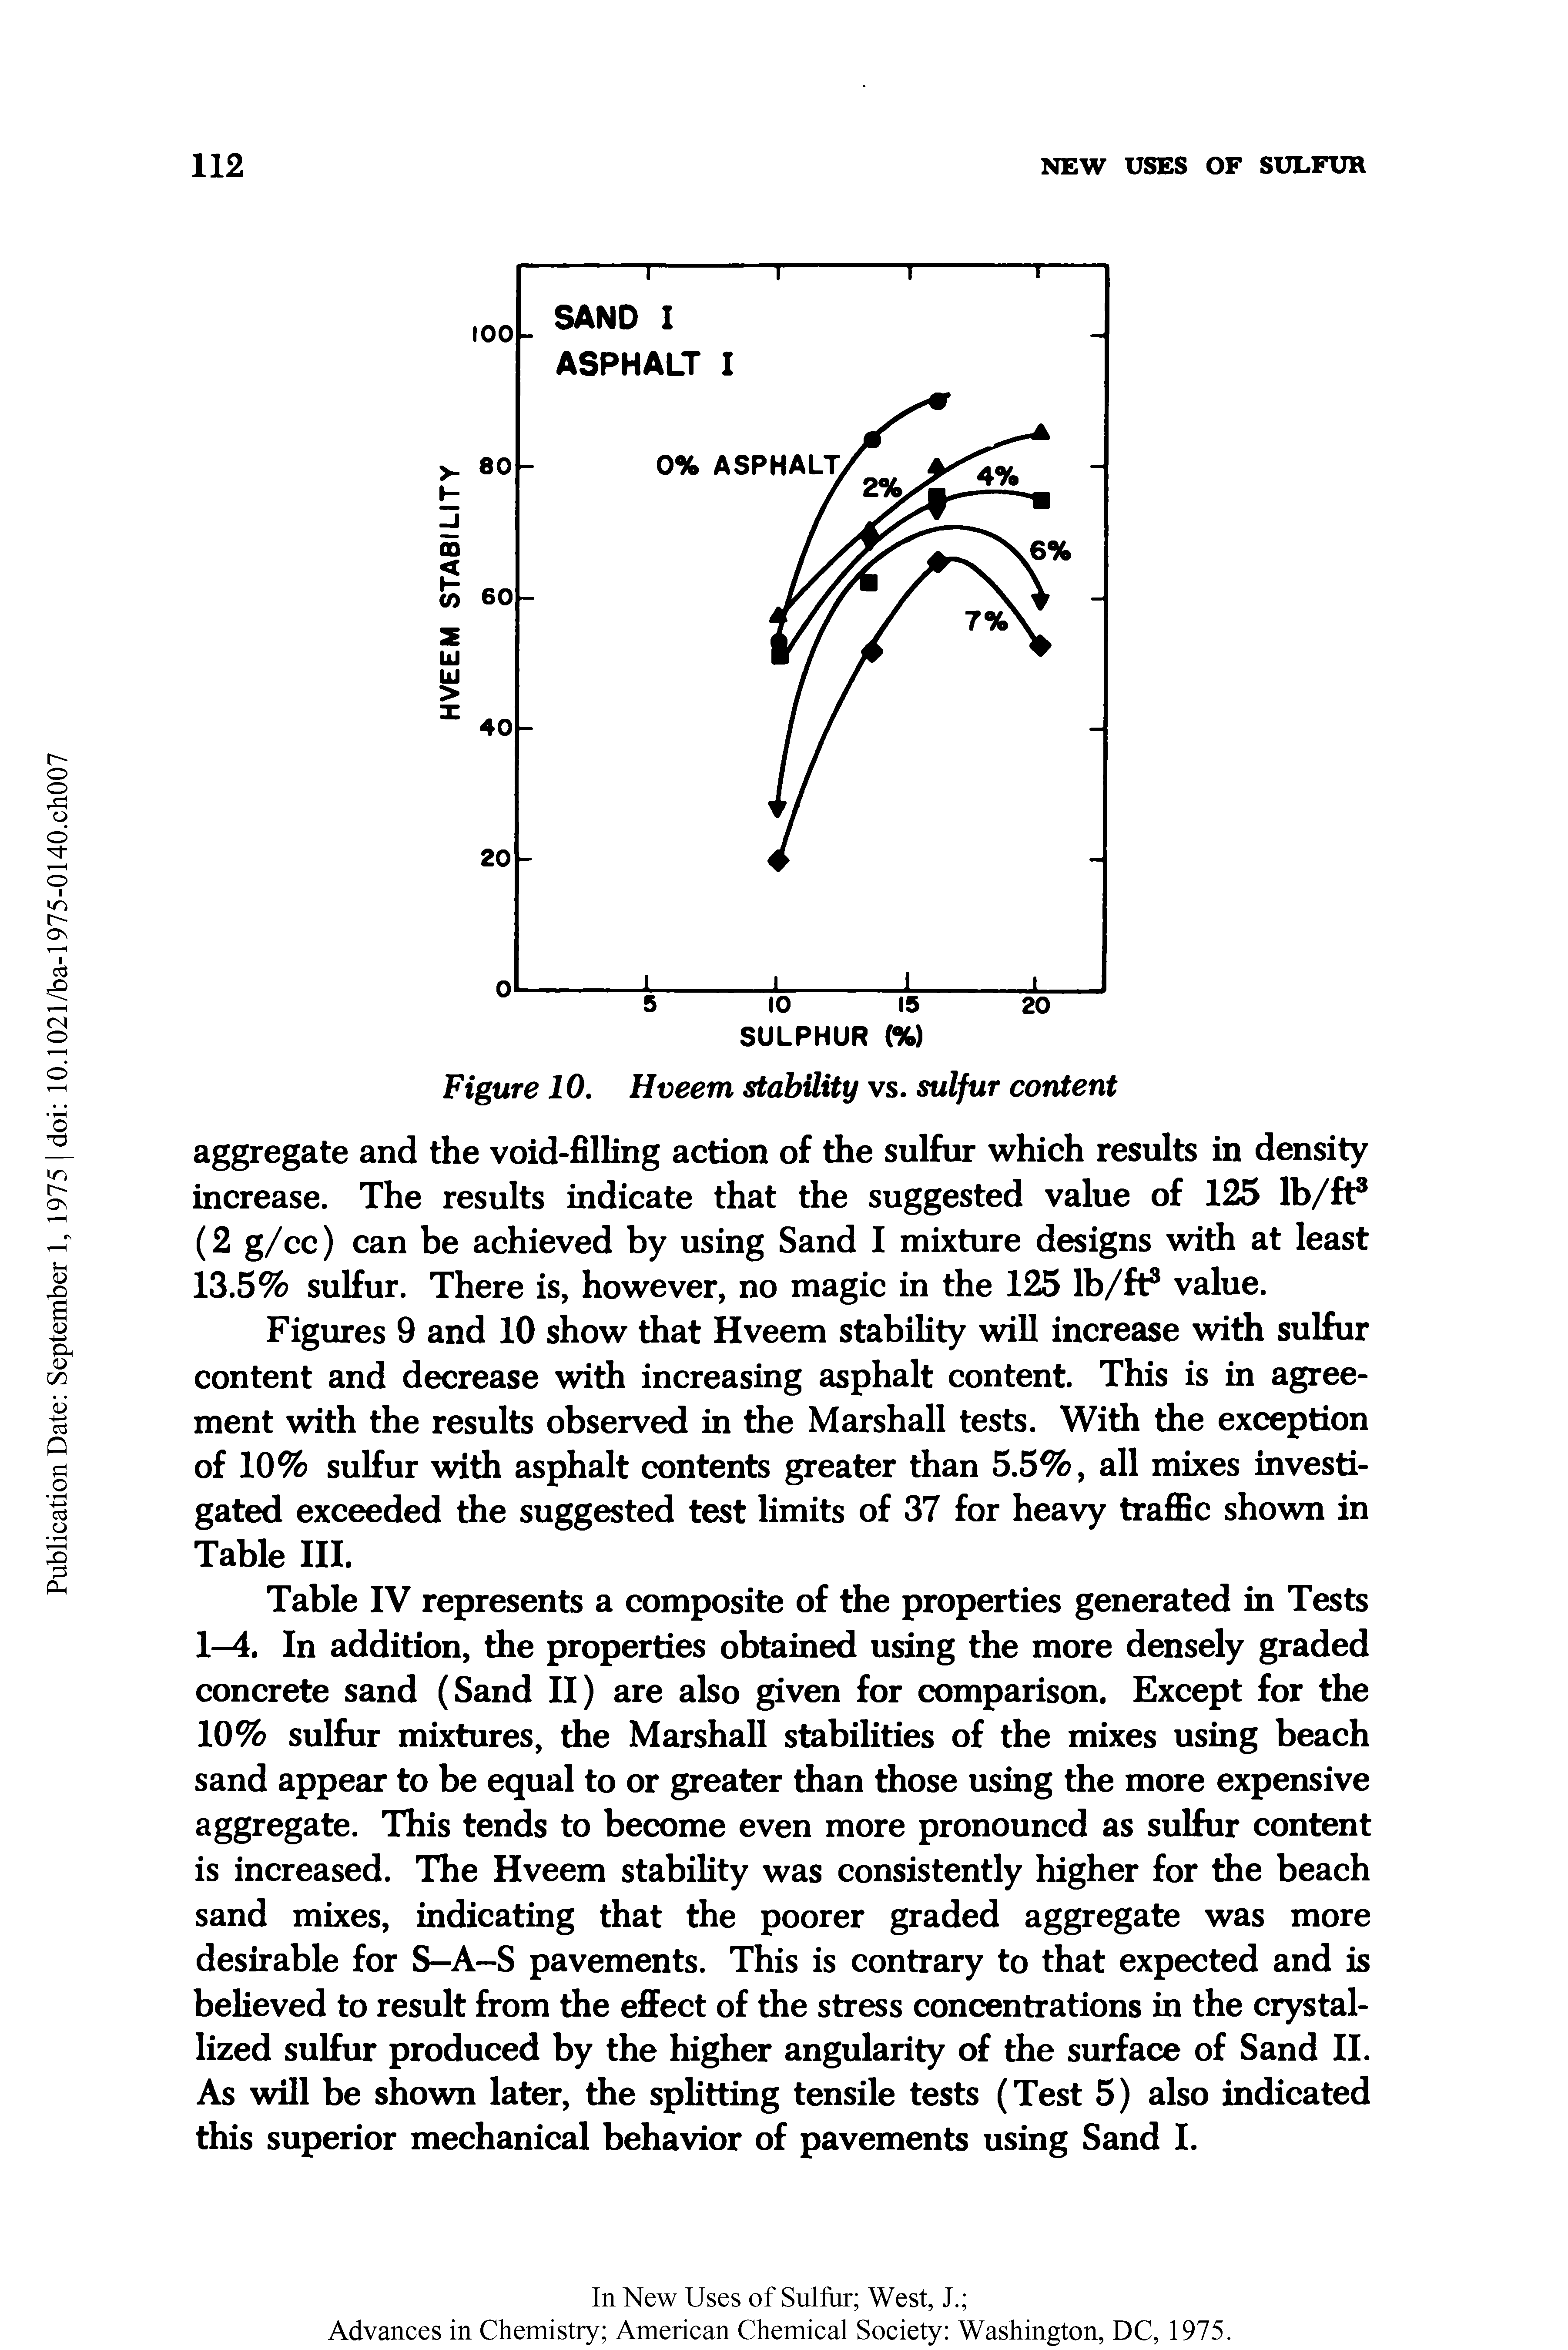 Figures 9 and 10 show that Hveem stability will increase with sulfur content and decrease with increasing asphalt content. This is in agreement with the results observed in the Marshall tests. With the exception of 10% sulfur with asphalt contents greater than 5.5%, all mixes investigated exceeded the suggested test limits of 37 for heavy traffic shown in Table III.